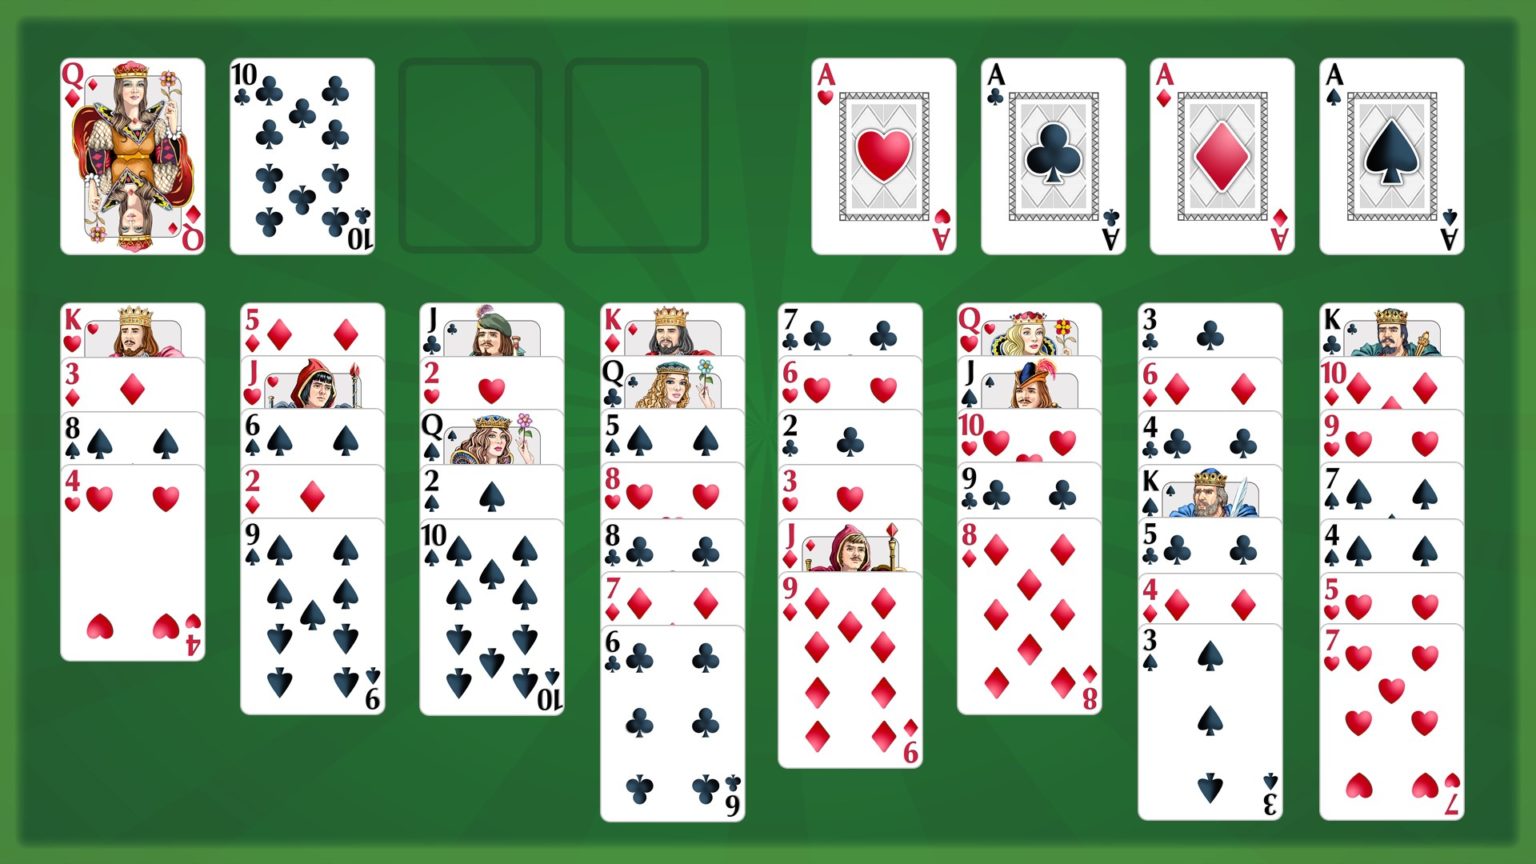 download stand alone freecell game without adds